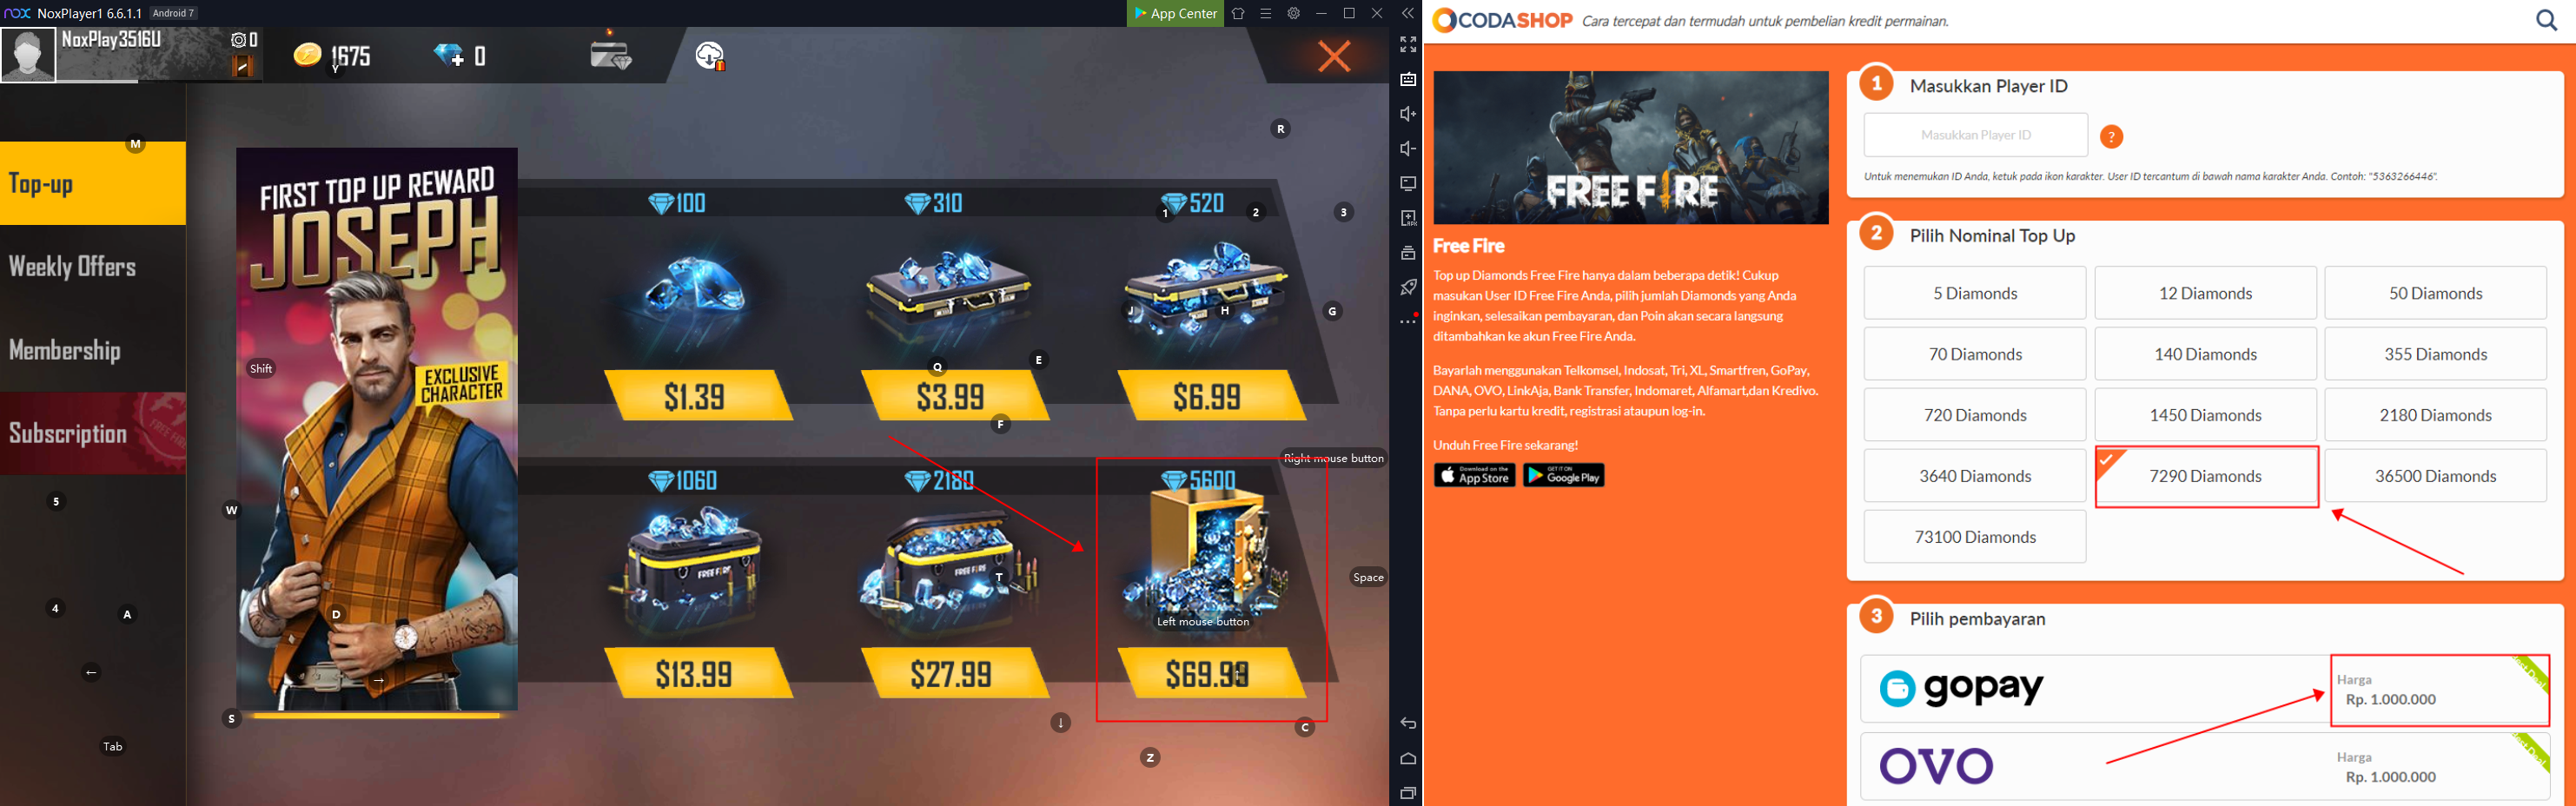 Play Garena Free Fire On Pc With Noxplayer Top Up With Codashop By Bowen Kou Medium